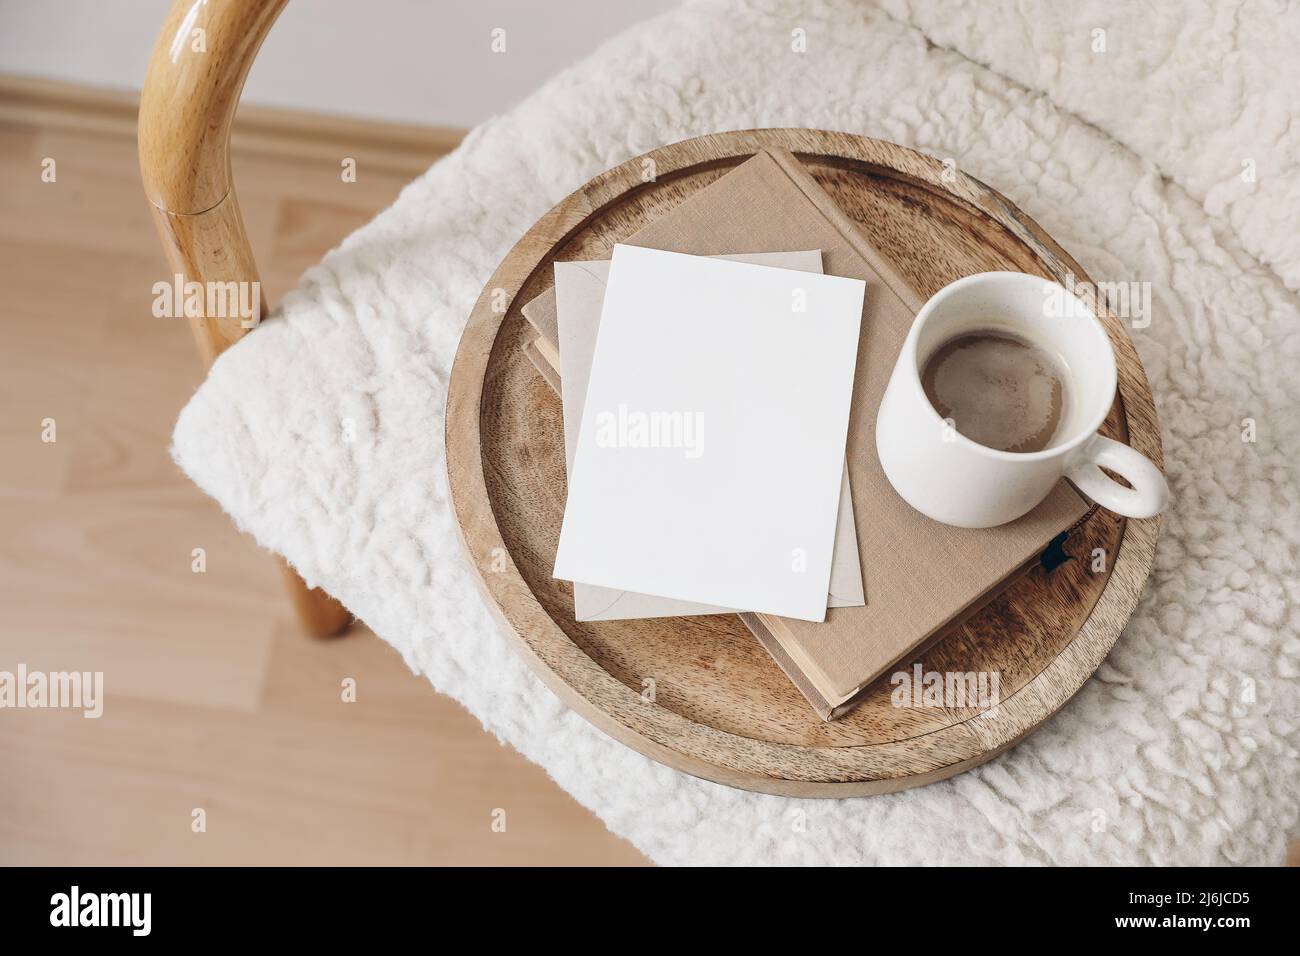 Boho breakfast still life scene. Blank greeting card, invitation. Book, cup of coffee. Wooden tray. Stationery mock-up. Elegant wooden chair, trendy Stock Photo